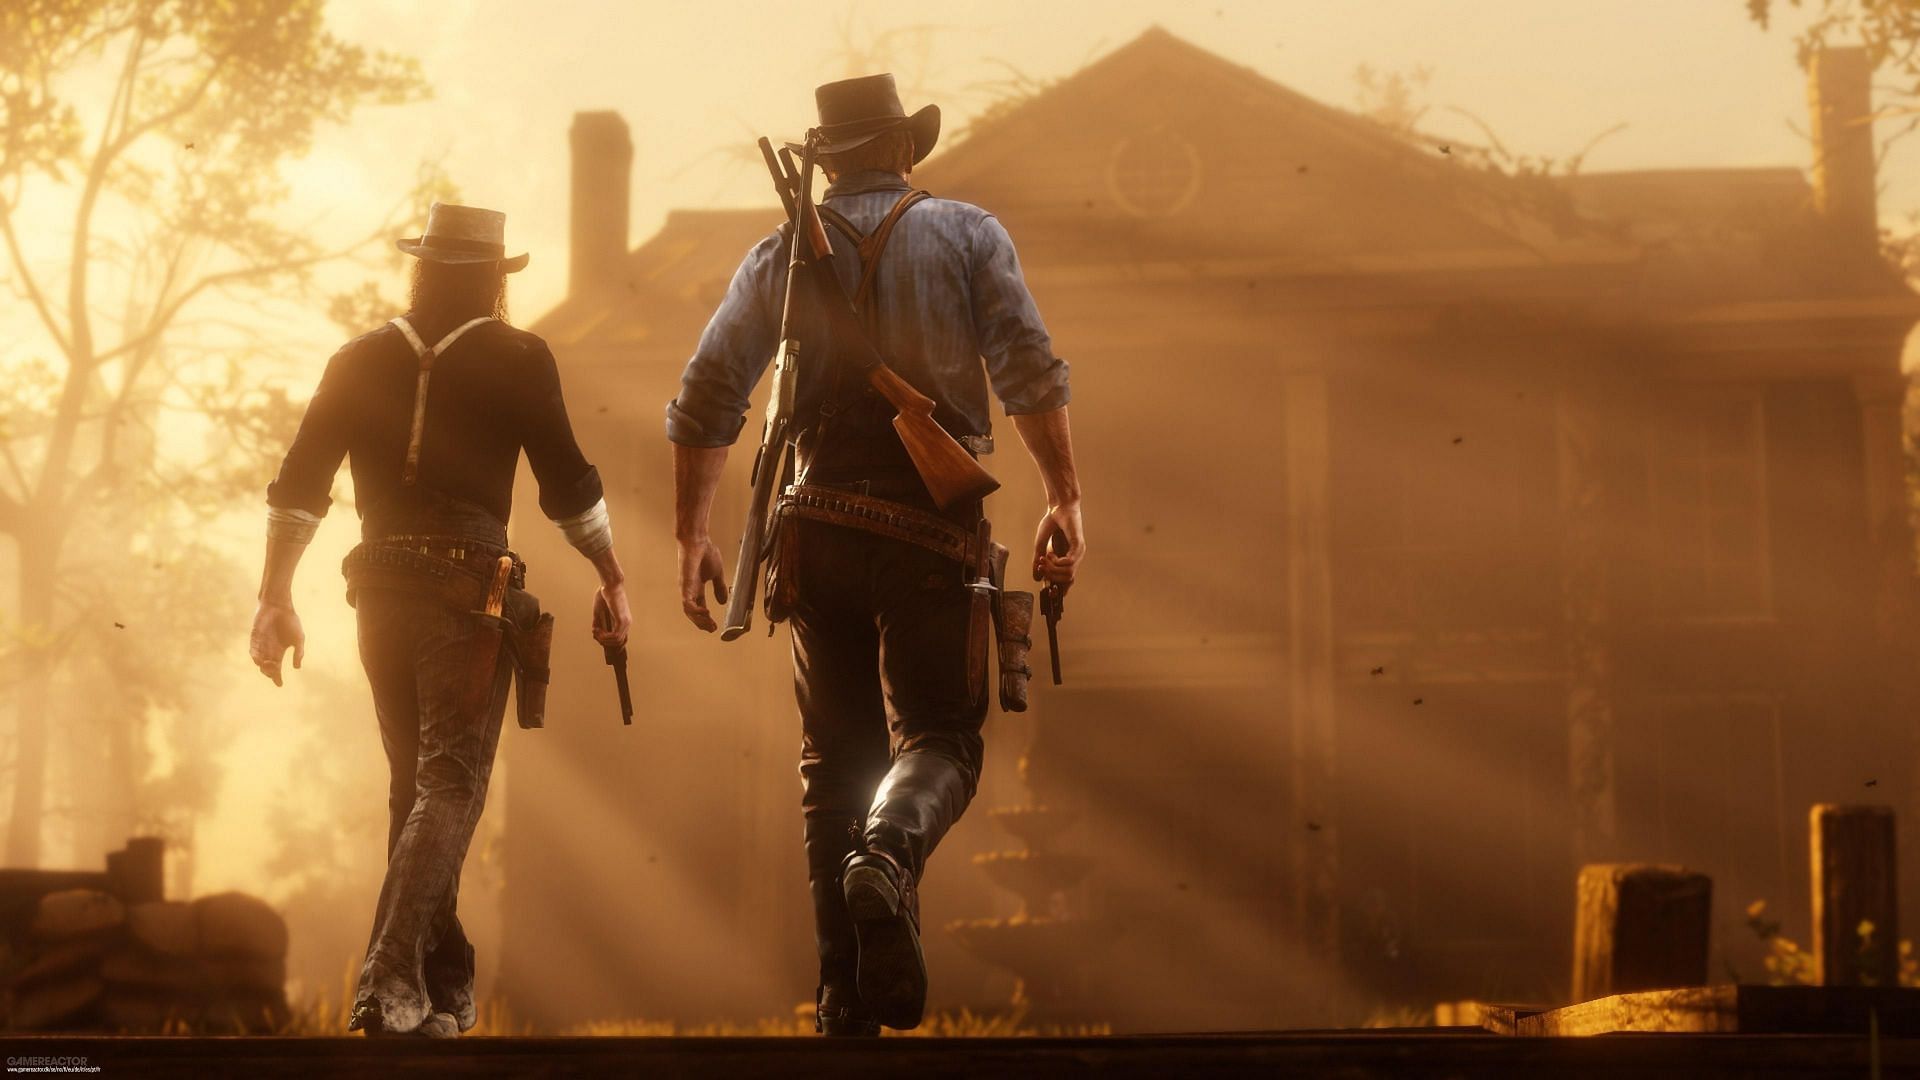 Red Dead Redemption 2 is locked at 30fps on the PS4 (image via Rockstar Games)